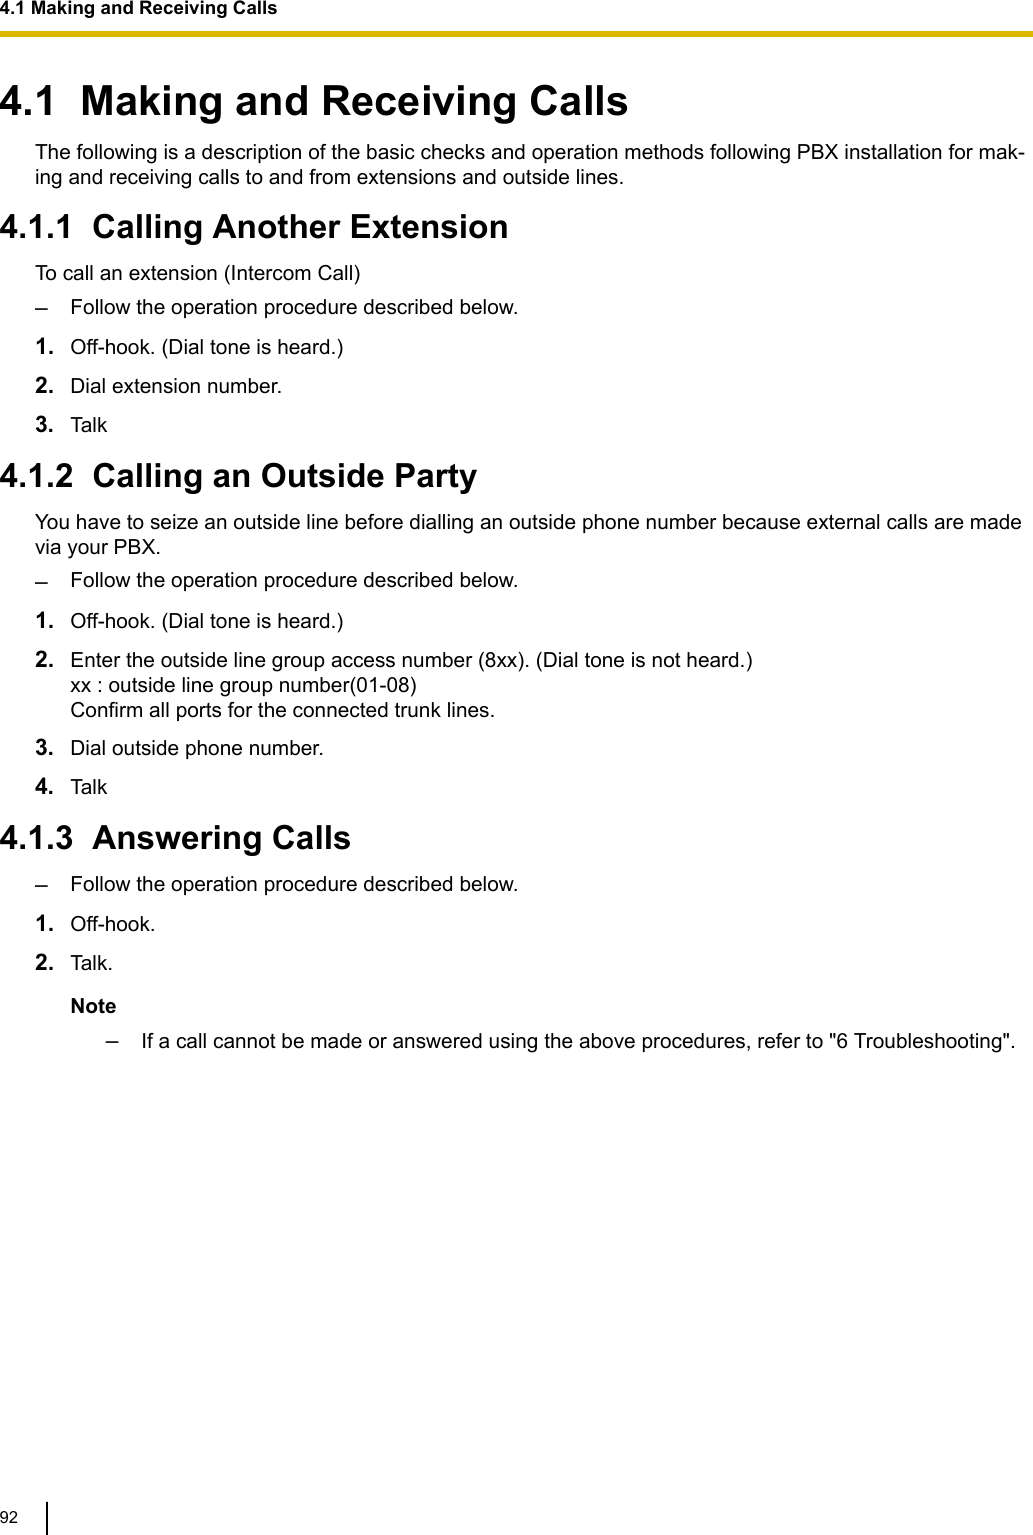 4.1  Making and Receiving CallsThe following is a description of the basic checks and operation methods following PBX installation for mak-ing and receiving calls to and from extensions and outside lines.4.1.1  Calling Another ExtensionTo call an extension (Intercom Call)–Follow the operation procedure described below.1. Off-hook. (Dial tone is heard.)2. Dial extension number.3. Talk4.1.2  Calling an Outside PartyYou have to seize an outside line before dialling an outside phone number because external calls are madevia your PBX.–Follow the operation procedure described below.1. Off-hook. (Dial tone is heard.)2. Enter the outside line group access number (8xx). (Dial tone is not heard.)xx : outside line group number(01-08)Confirm all ports for the connected trunk lines.3. Dial outside phone number.4. Talk4.1.3  Answering Calls–Follow the operation procedure described below.1. Off-hook.2. Talk.Note–If a call cannot be made or answered using the above procedures, refer to &quot;6 Troubleshooting&quot;.4.1 Making and Receiving Calls92